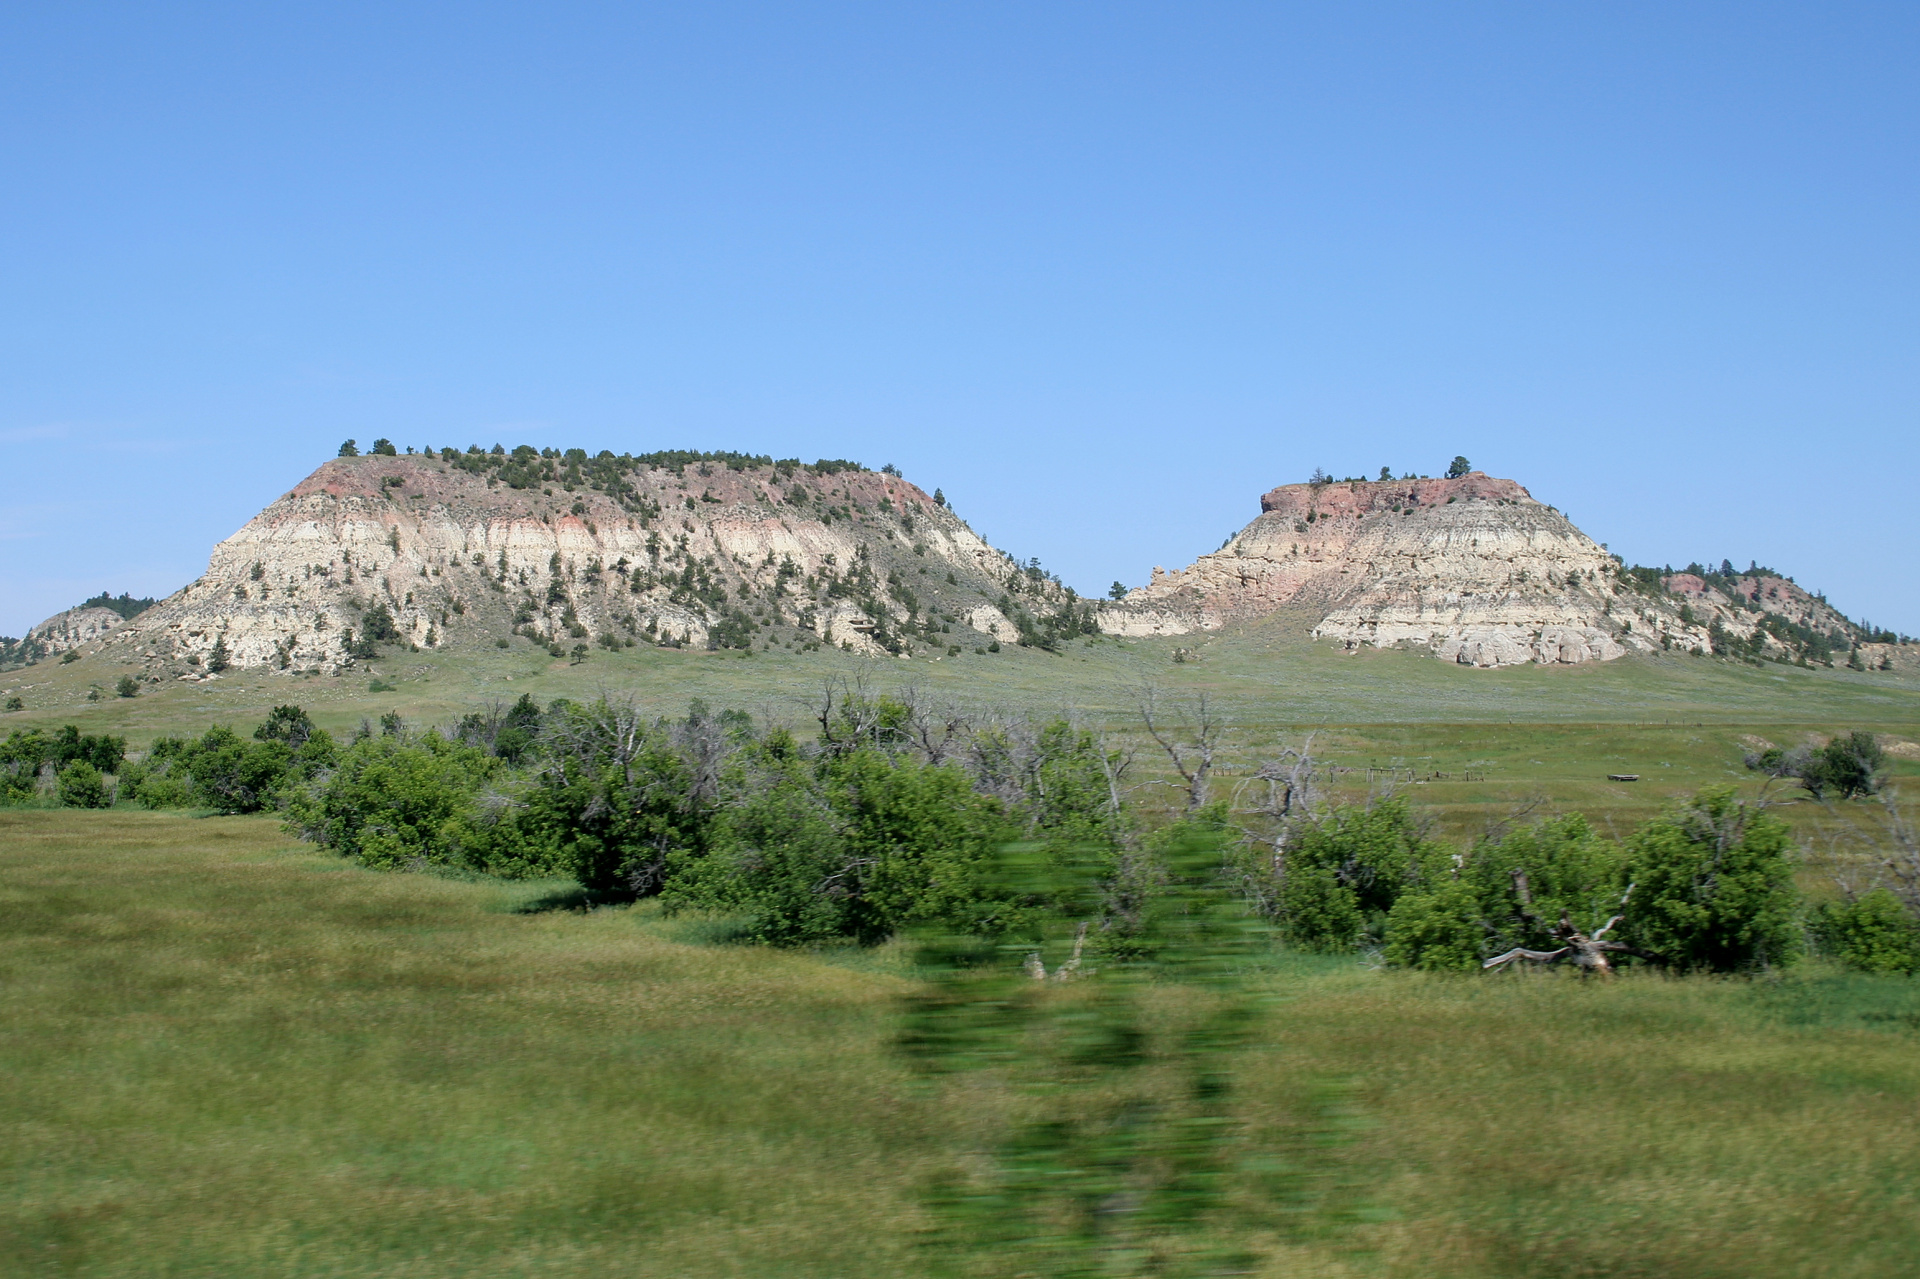 Buttes and Rosebud Creek (Travels » US Trip 2: Cheyenne Epic » The Country » Colstrip)